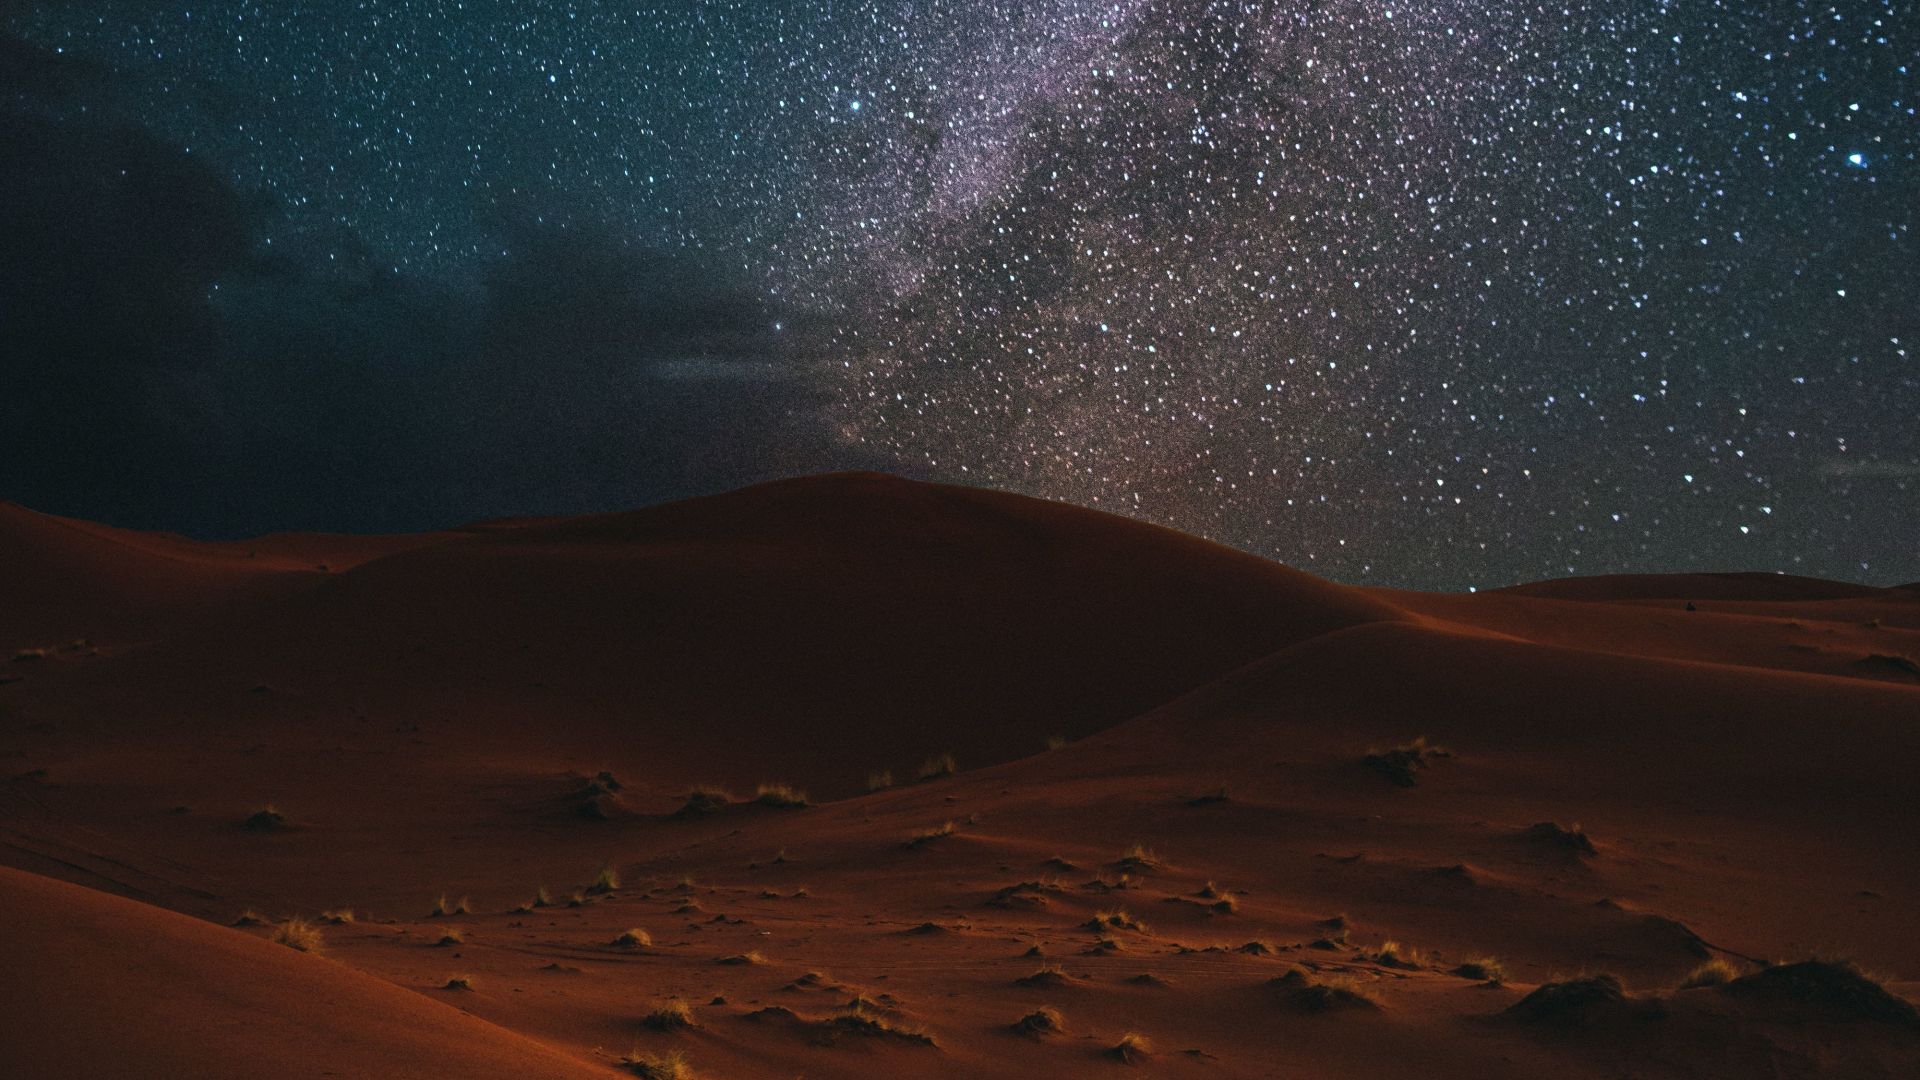 Desert, night, milky way, starry sky wallpaper, HD image, picture, background, 20f8f5